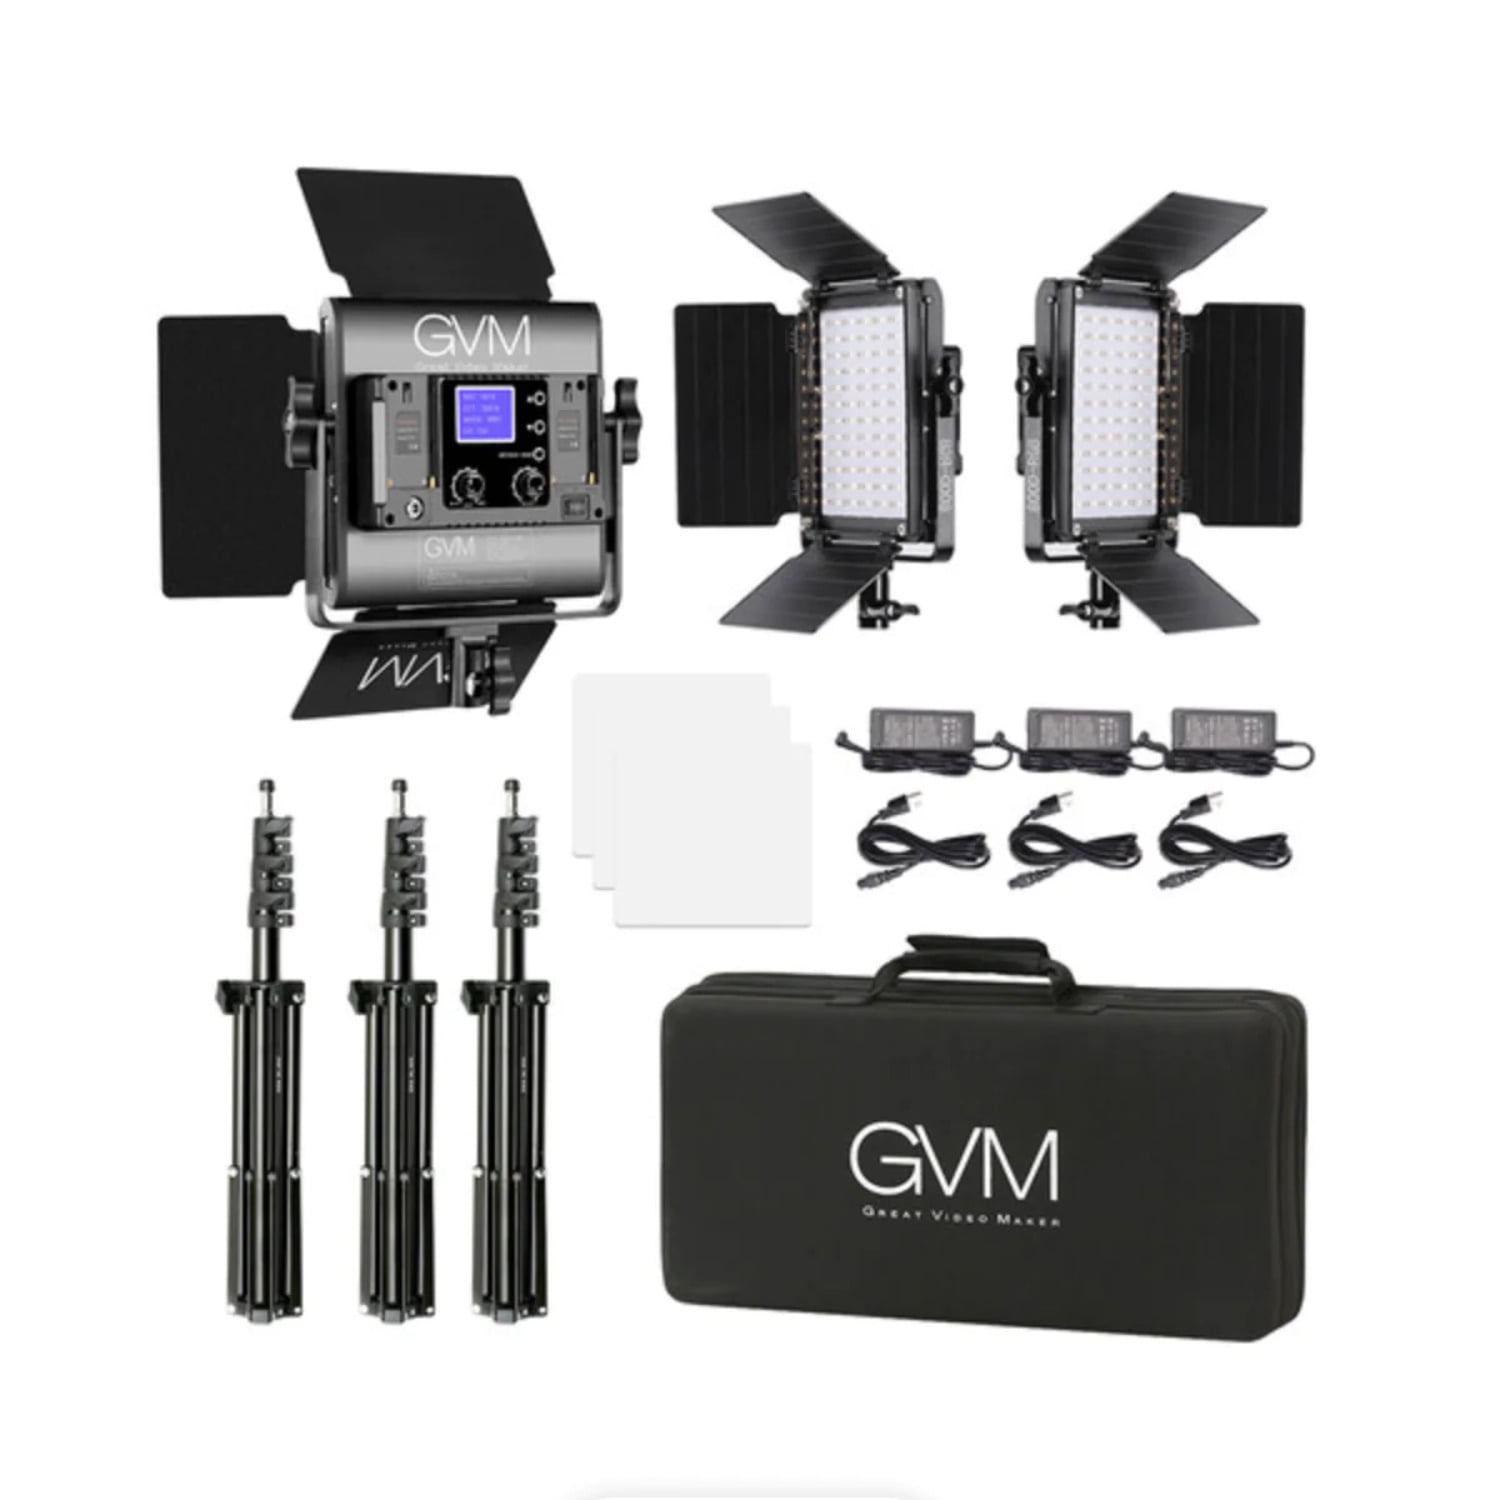  GVM 3 Pack LED Video Lighting Kits with APP Control